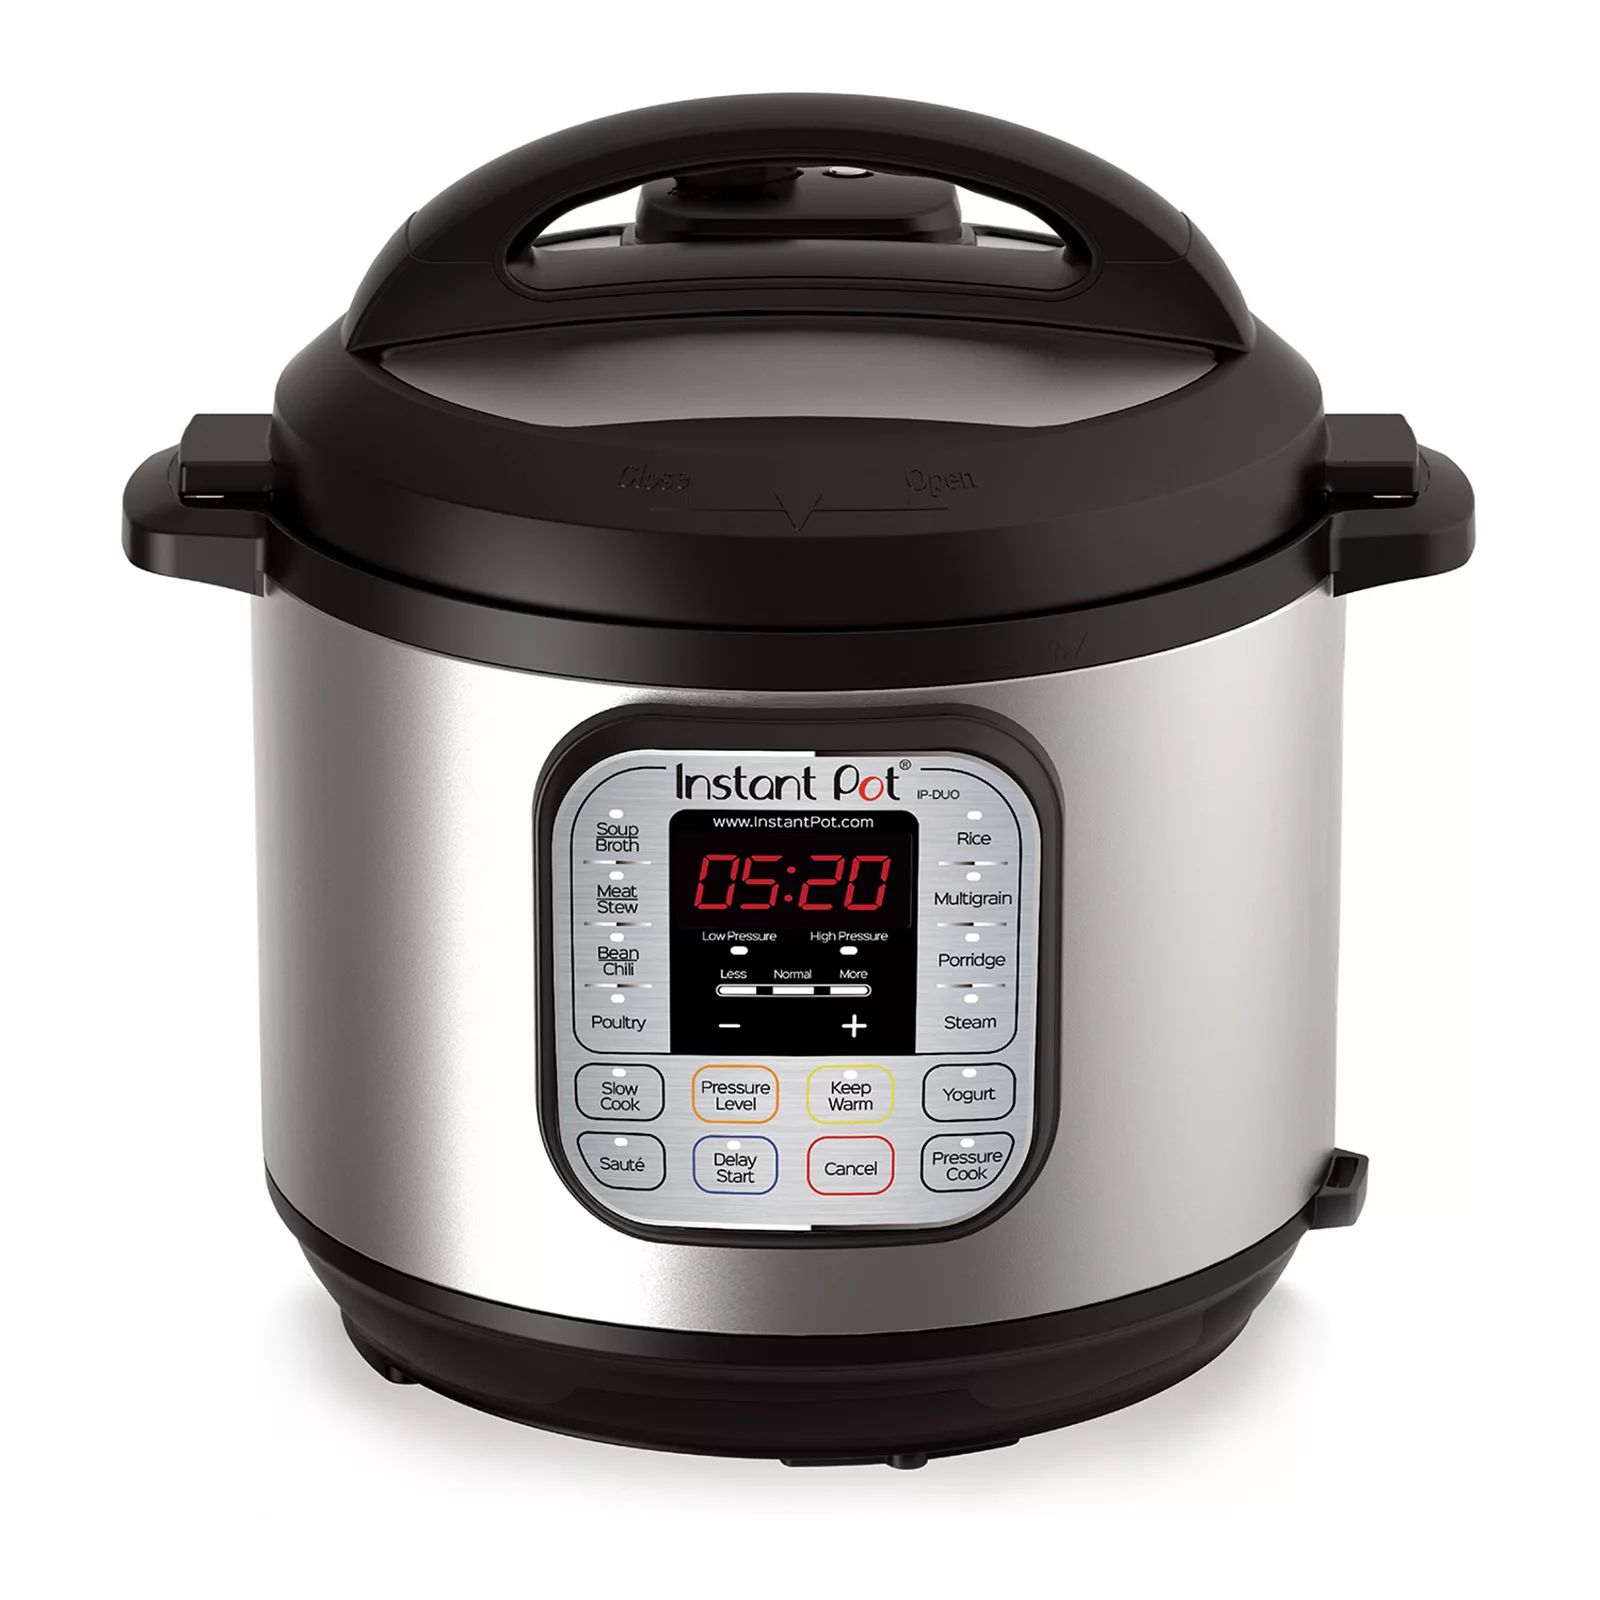 Instant Pot Duo 7-in-1 Programmable Pressure Cooker, 8 QT | Kohl's